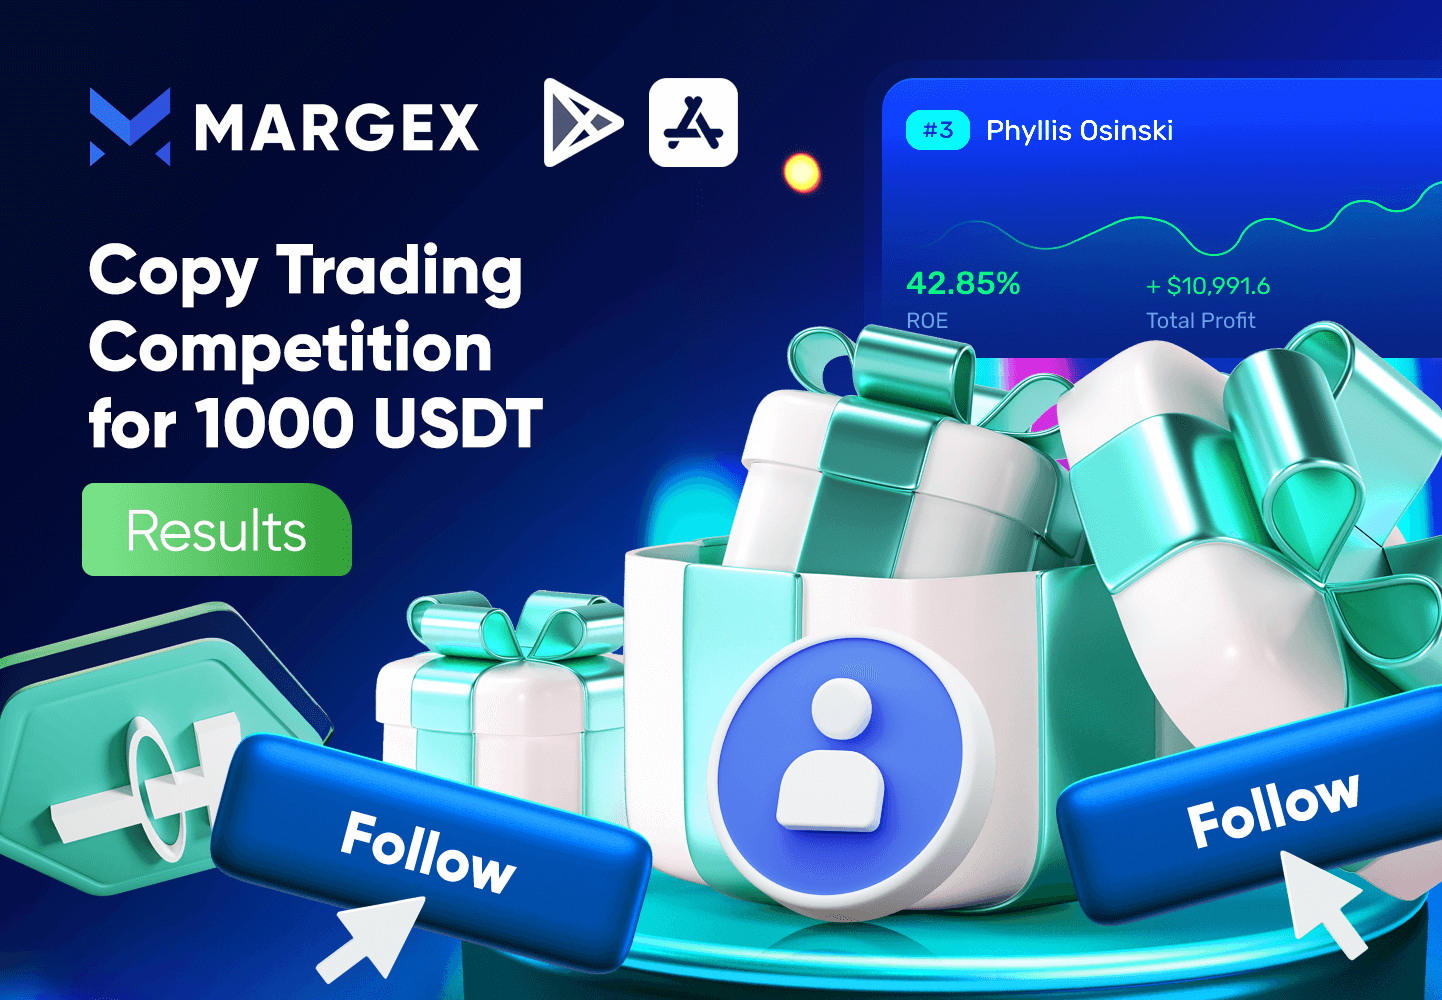 Margex Copy Trading Competition for followers has come to an end